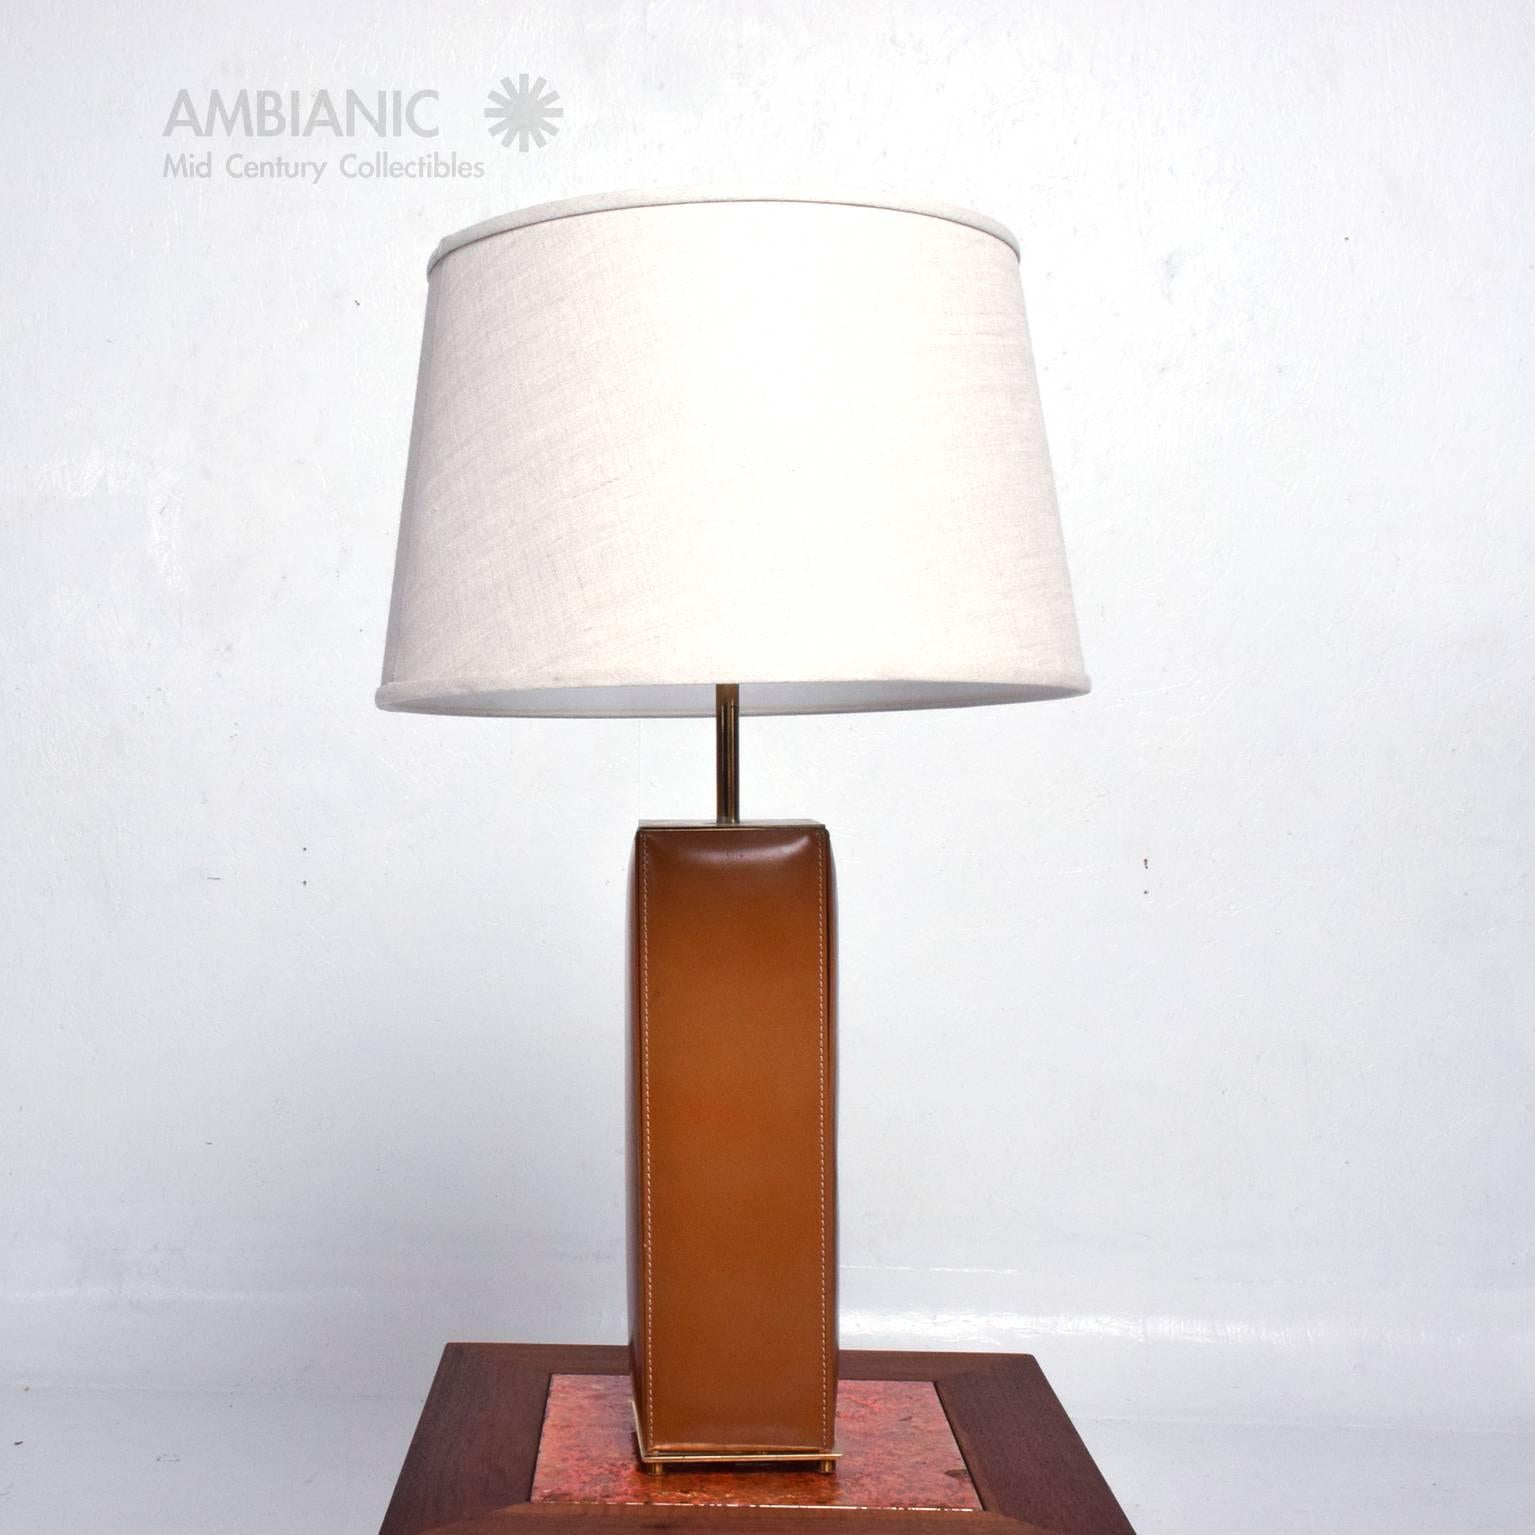 Pair of Leather and Brass Table Lamps, Mid-Century Period 1